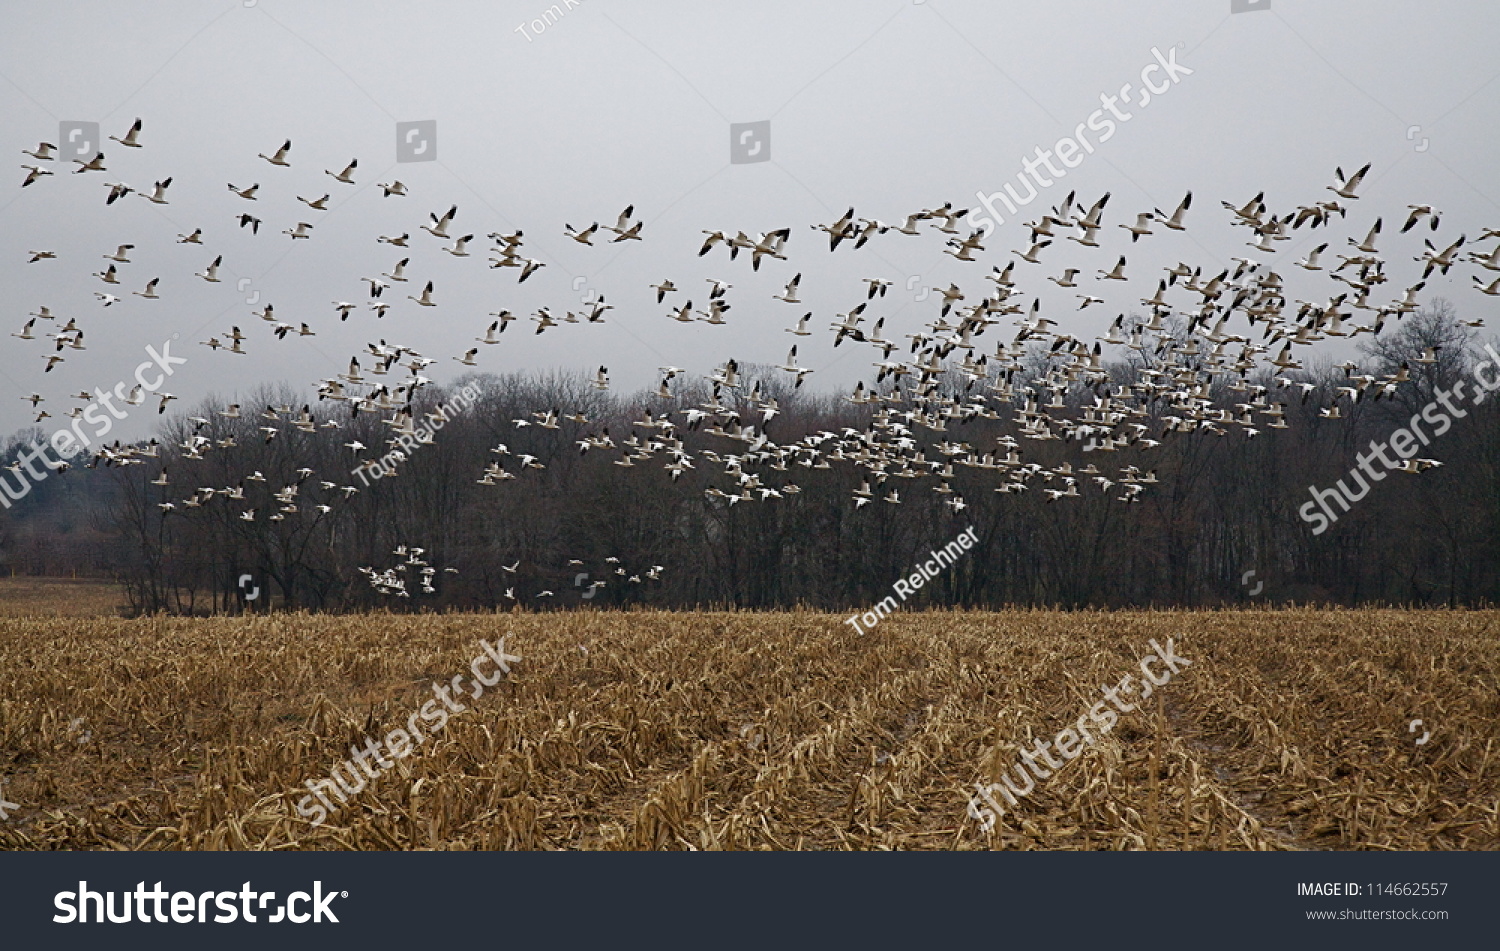 Large Flock Of Snow Geese In Flight Over Corn Field, Against A Gray Sky ...